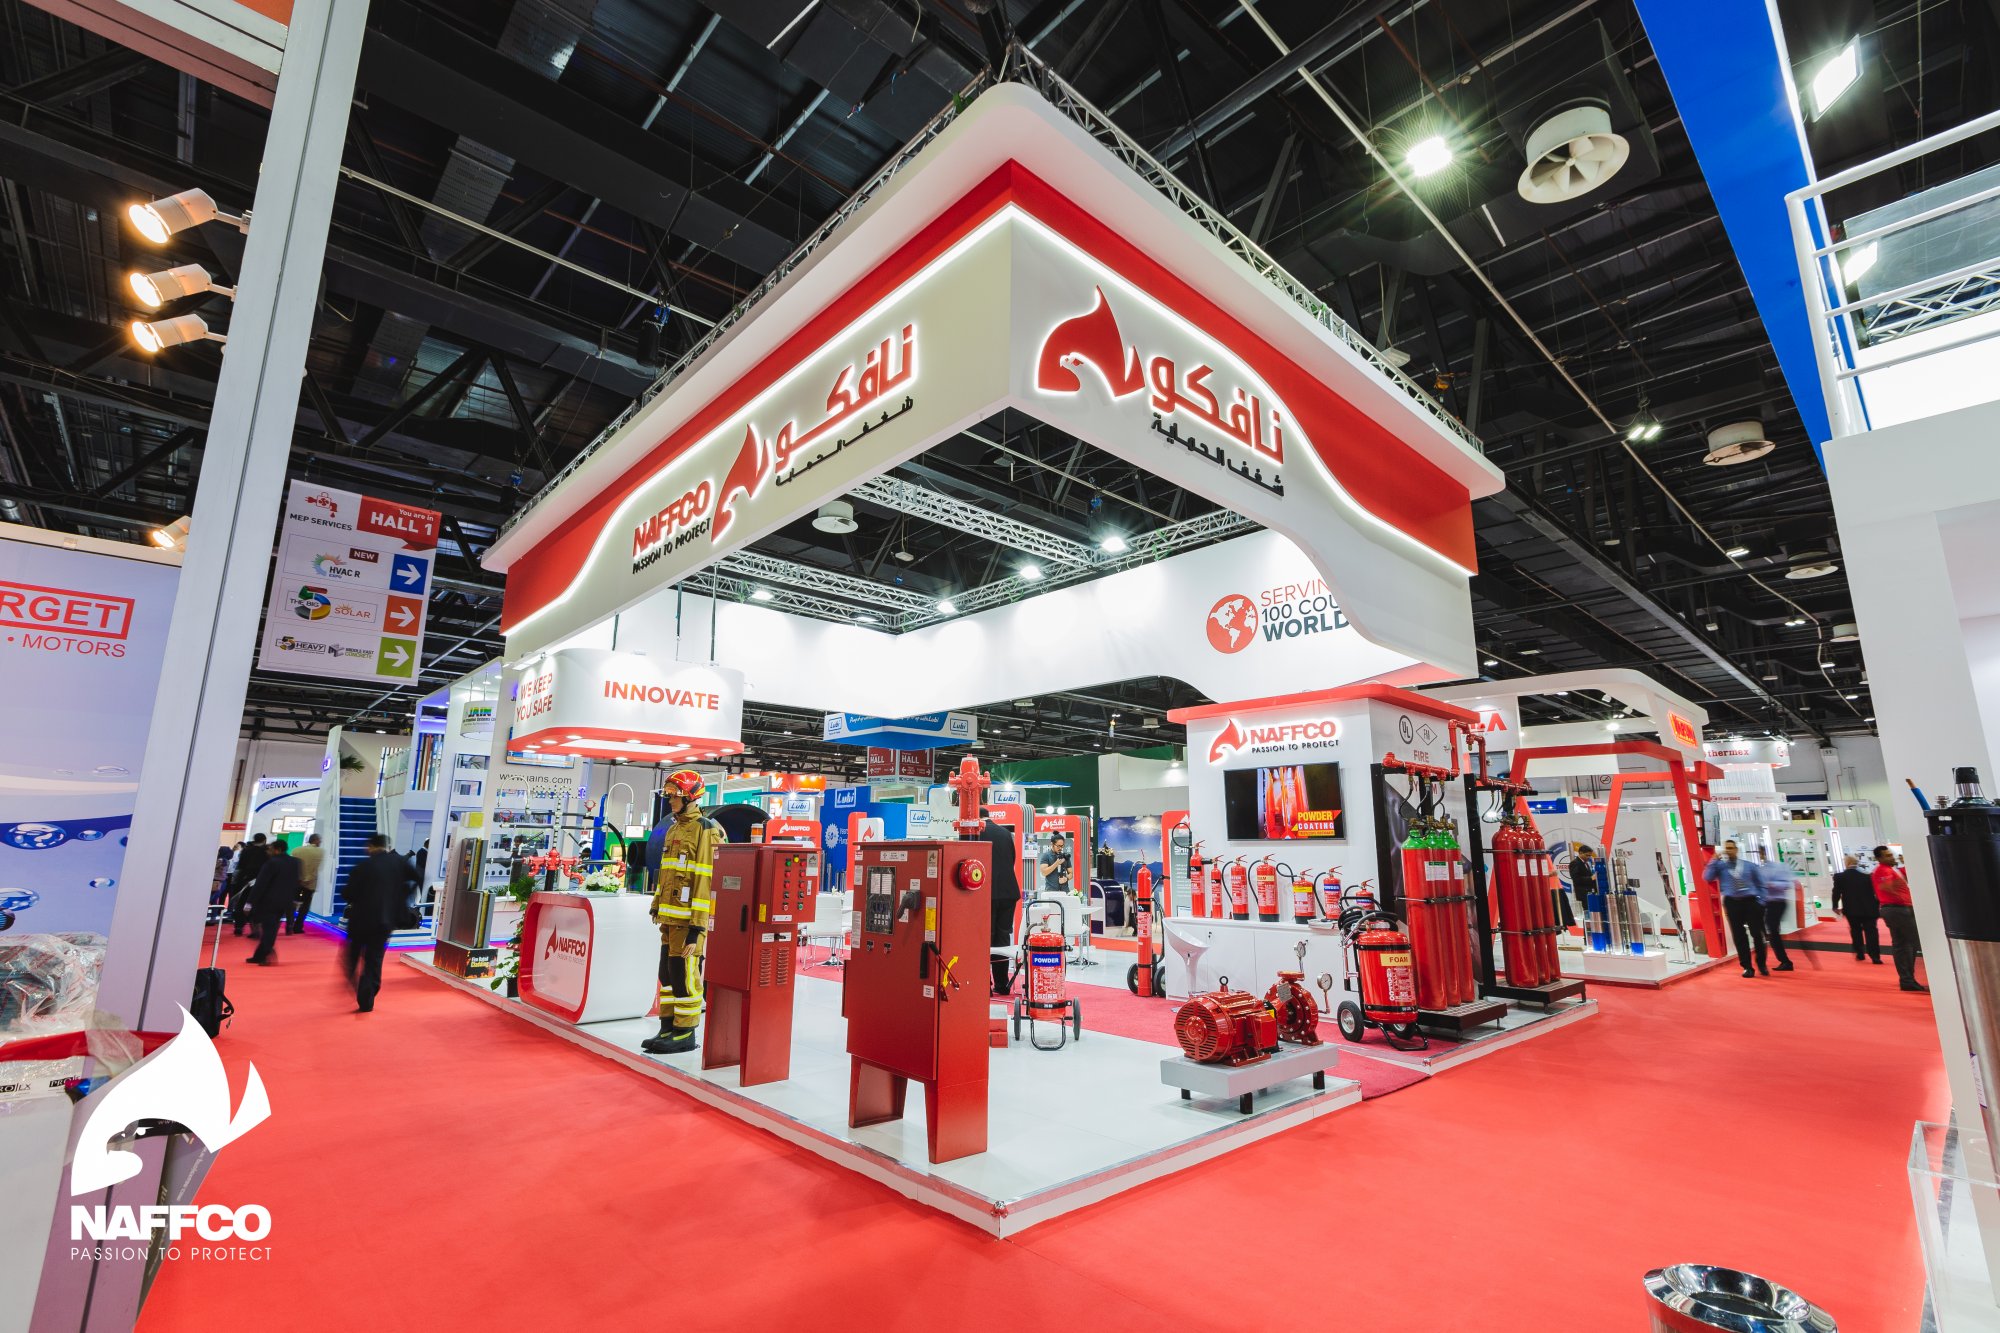 NAFFCO had Successfully exhibited at THE BIG 5 - The largest construction event in the middle East.